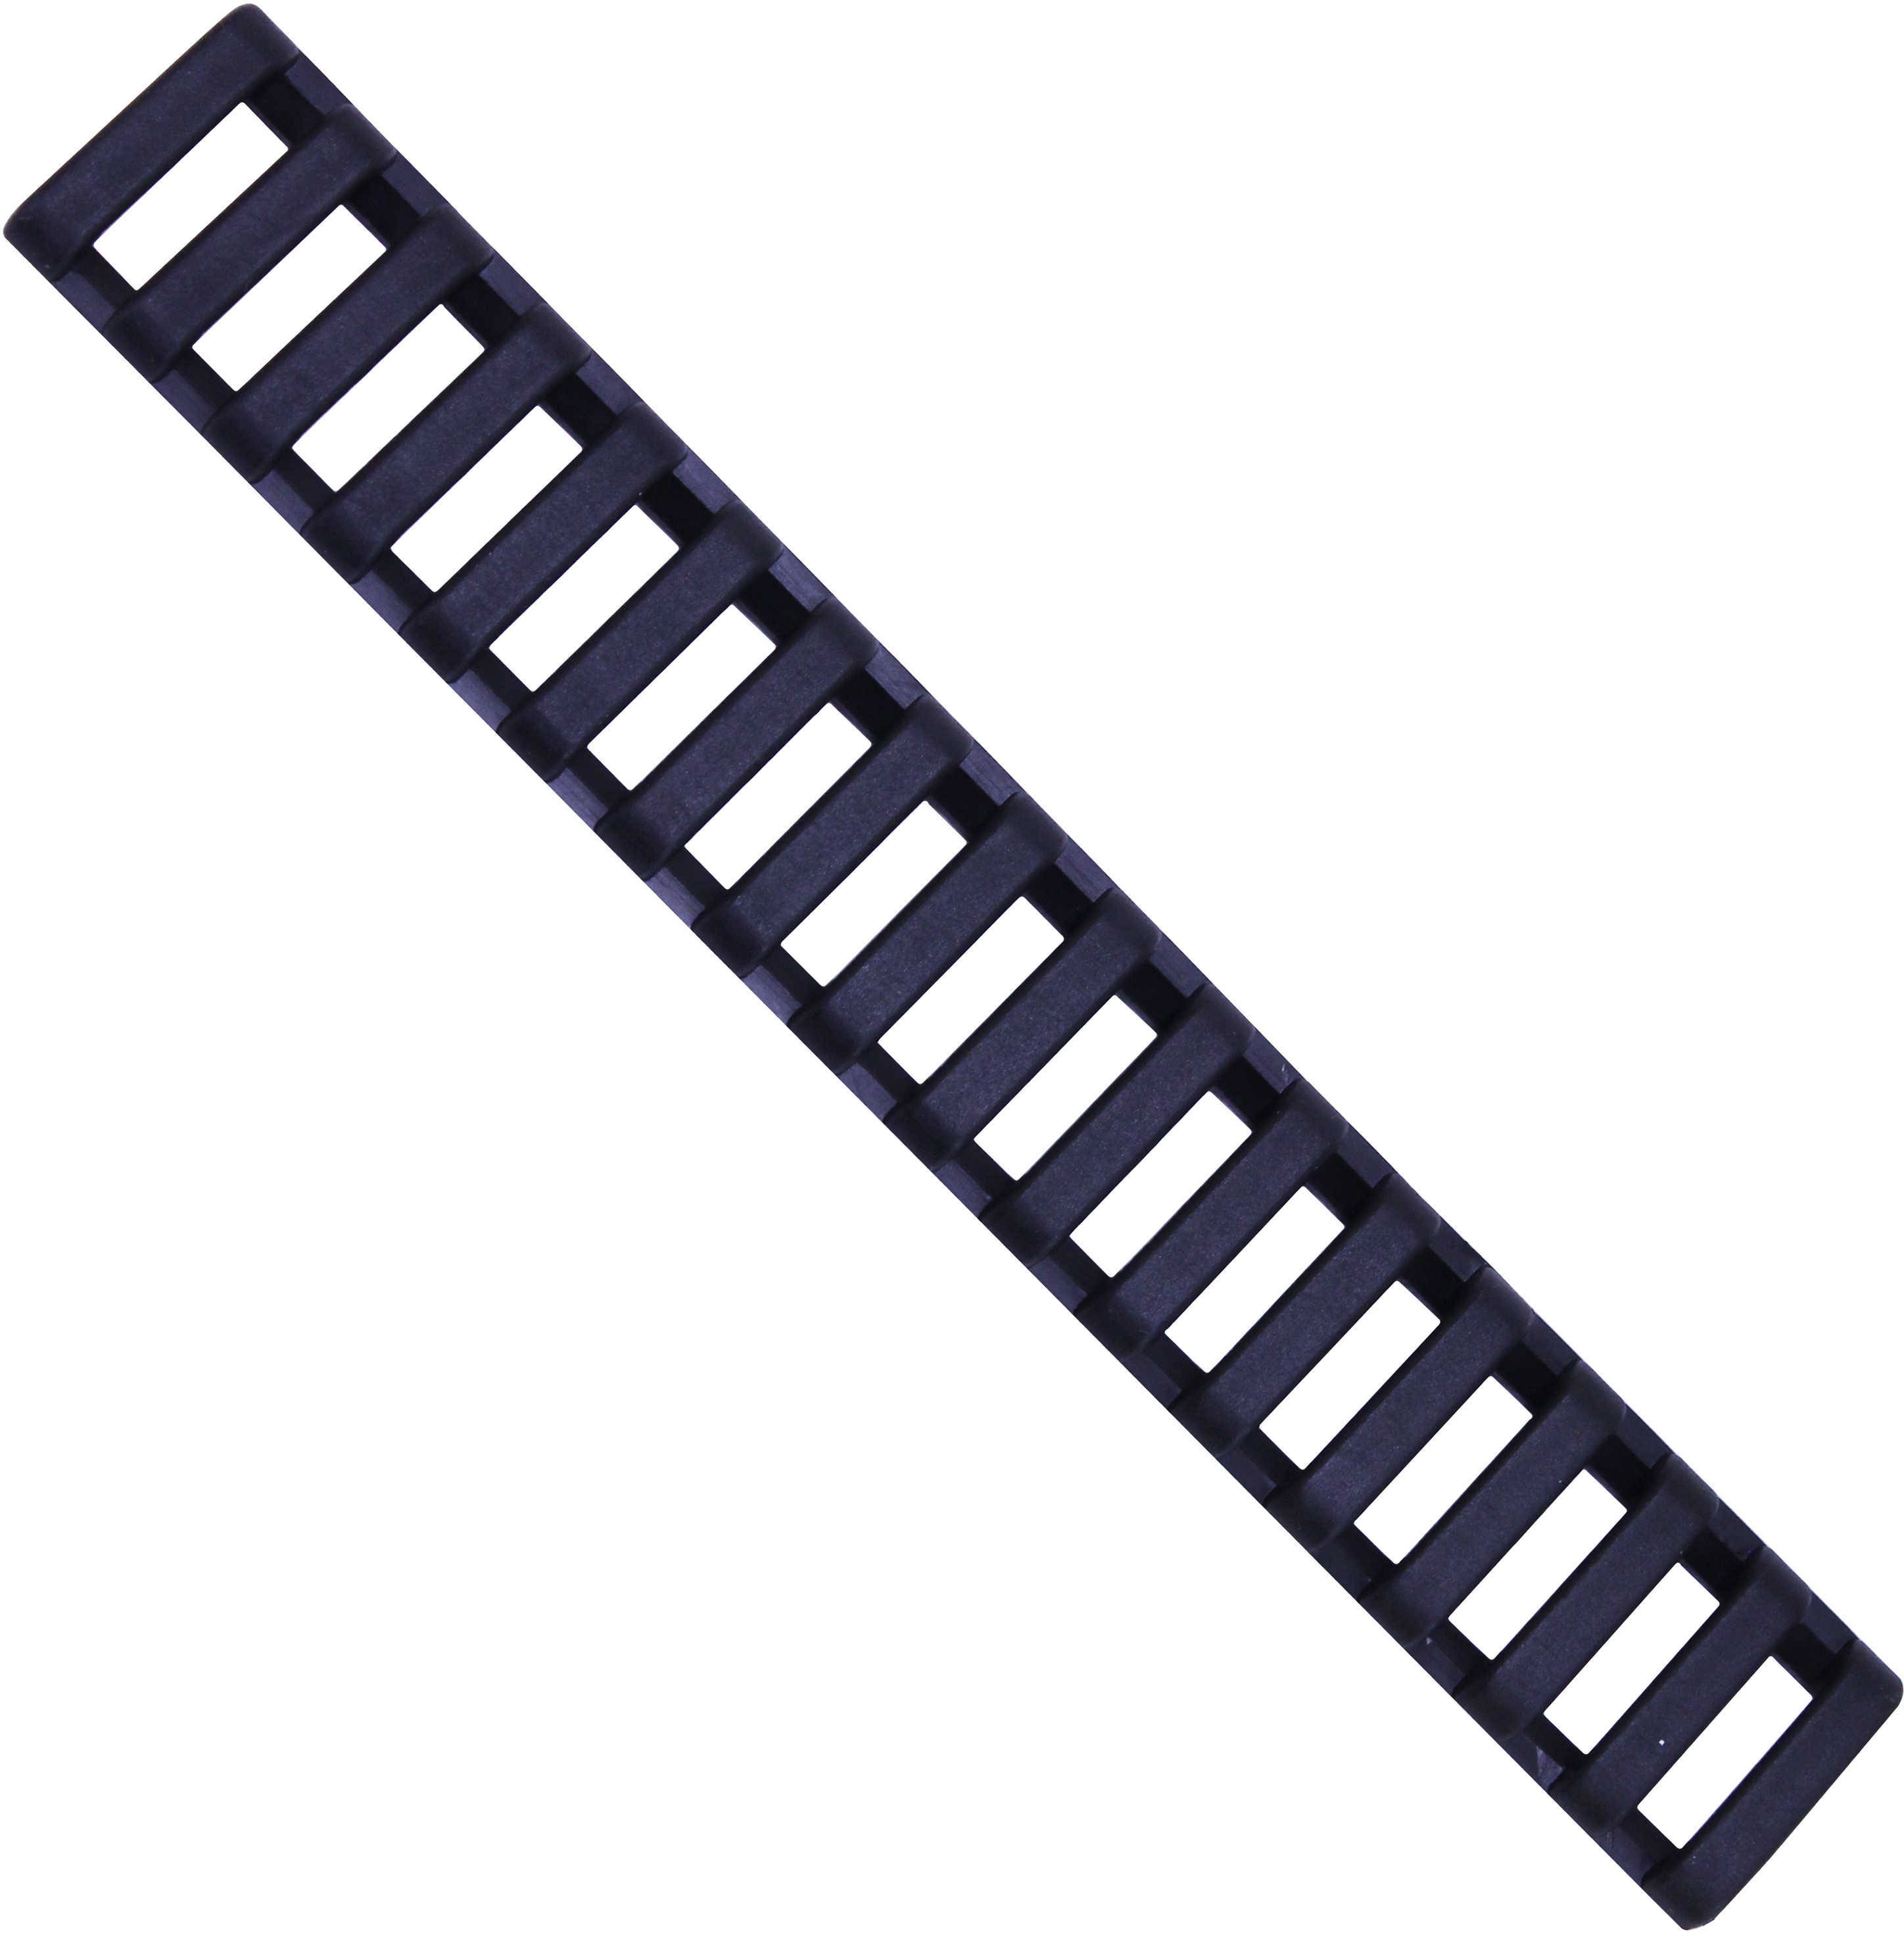 Falcon Industries Inc 3 Pack Black Low Profile Rail Cover Md: 4373Bk